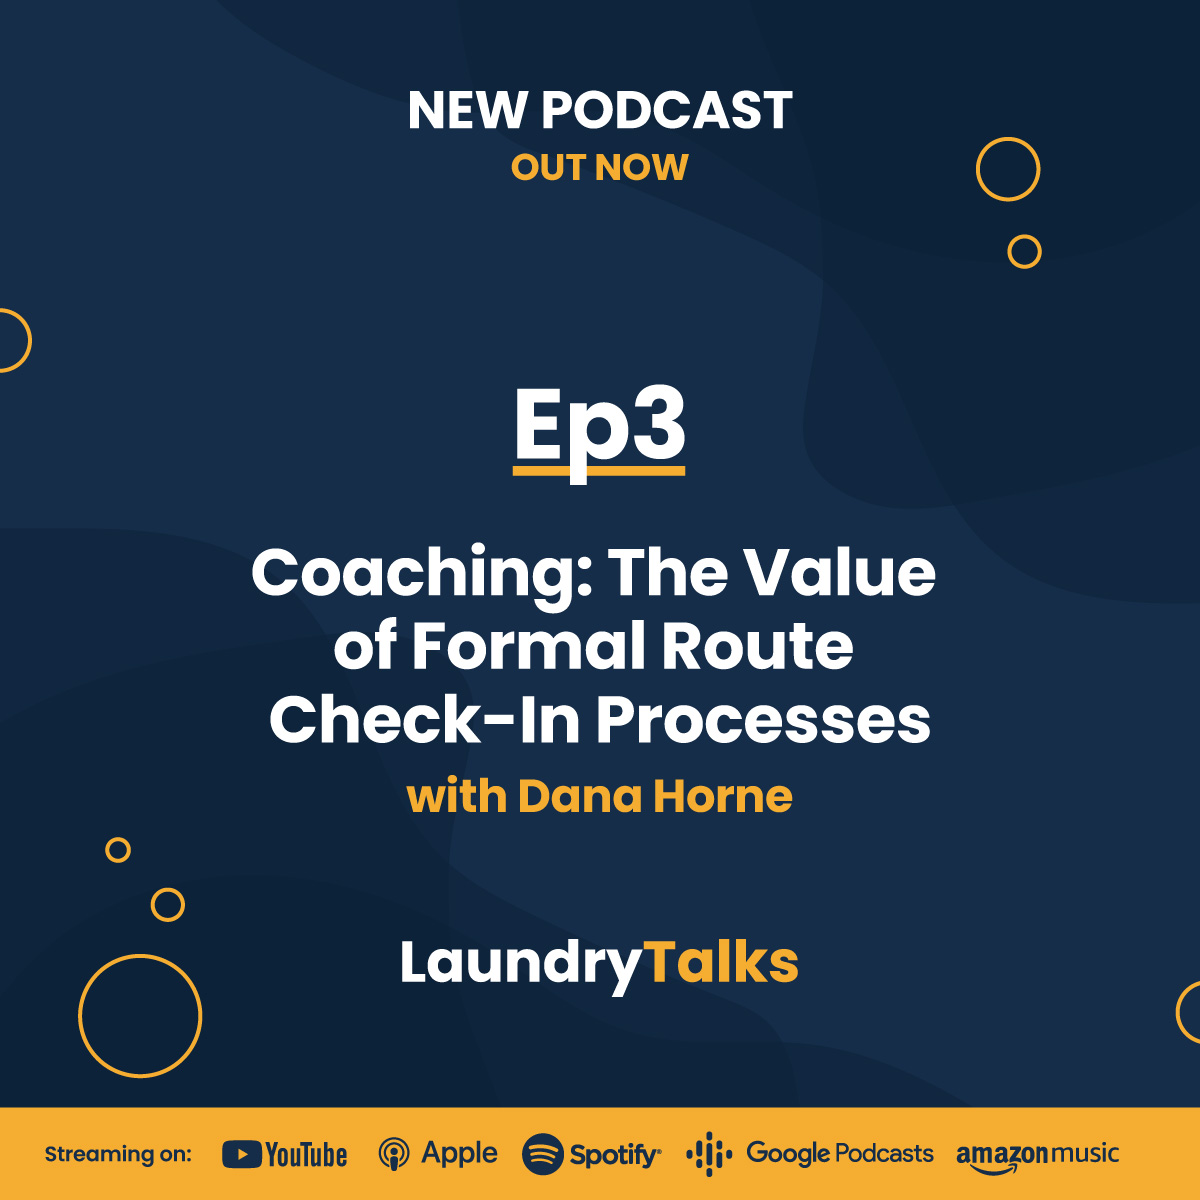 Coaching: The Value of Formal Route Check-In Processes With Dana Horne